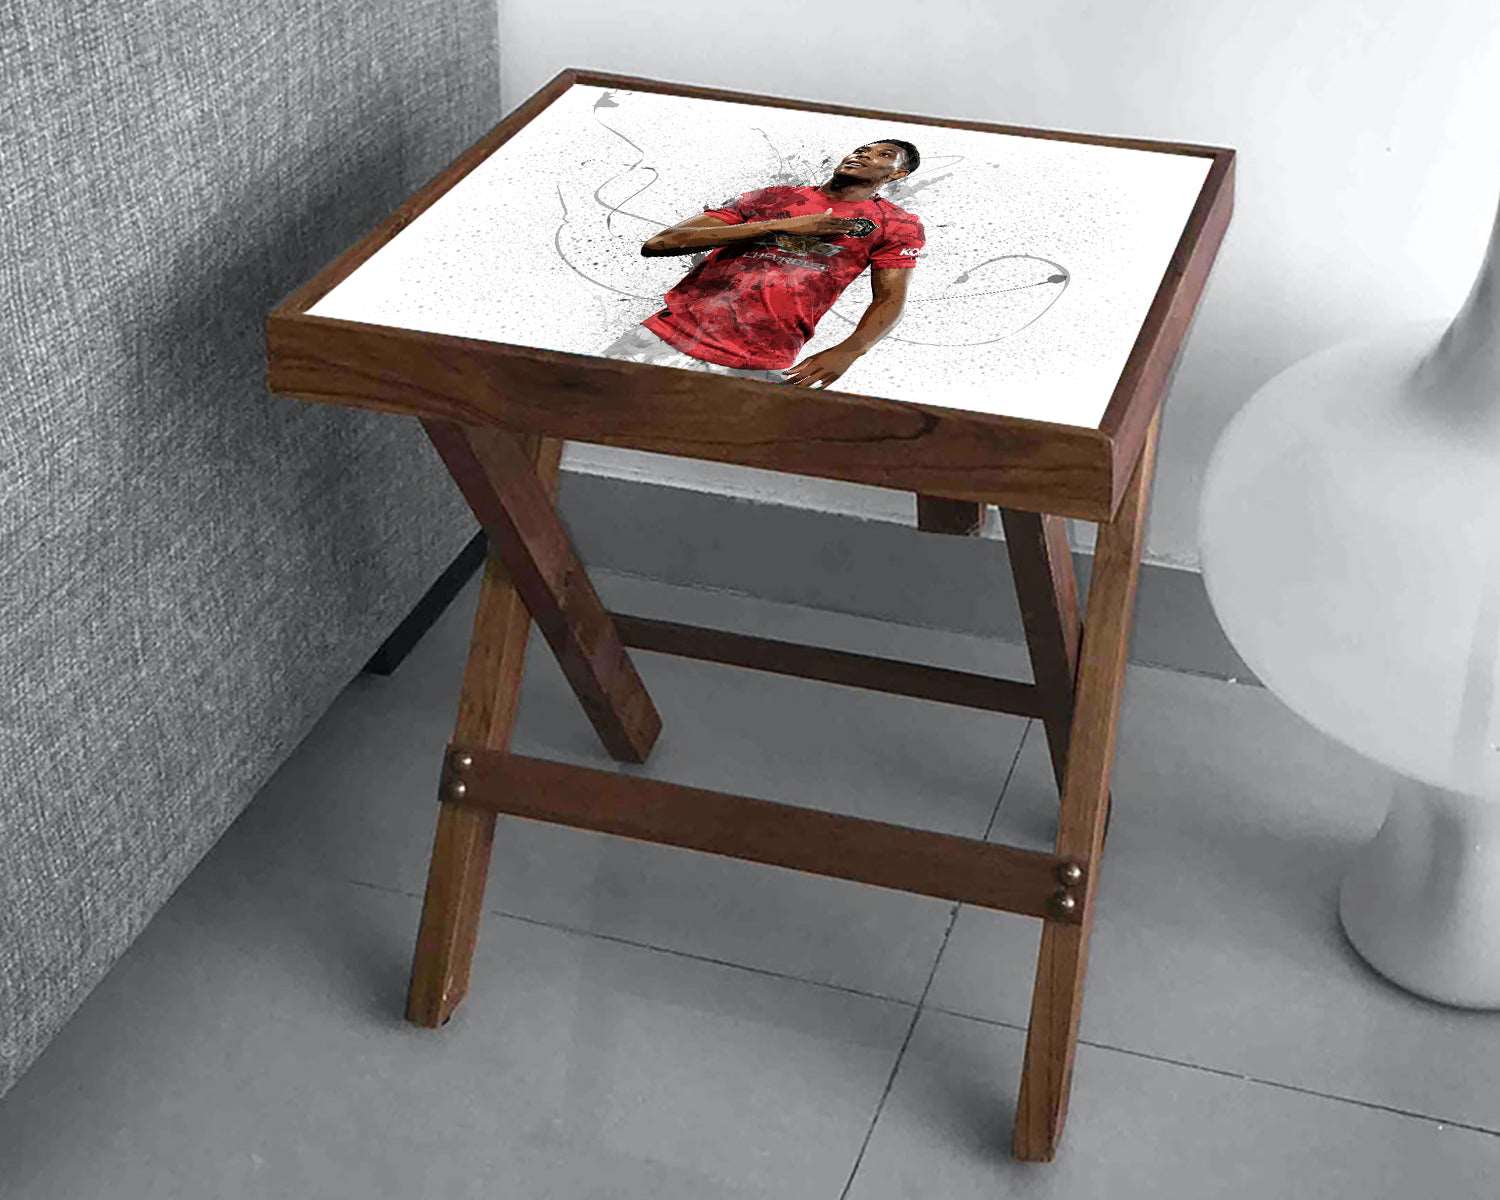 Anthony Martial Splash Effect Coffee and Laptop Table 